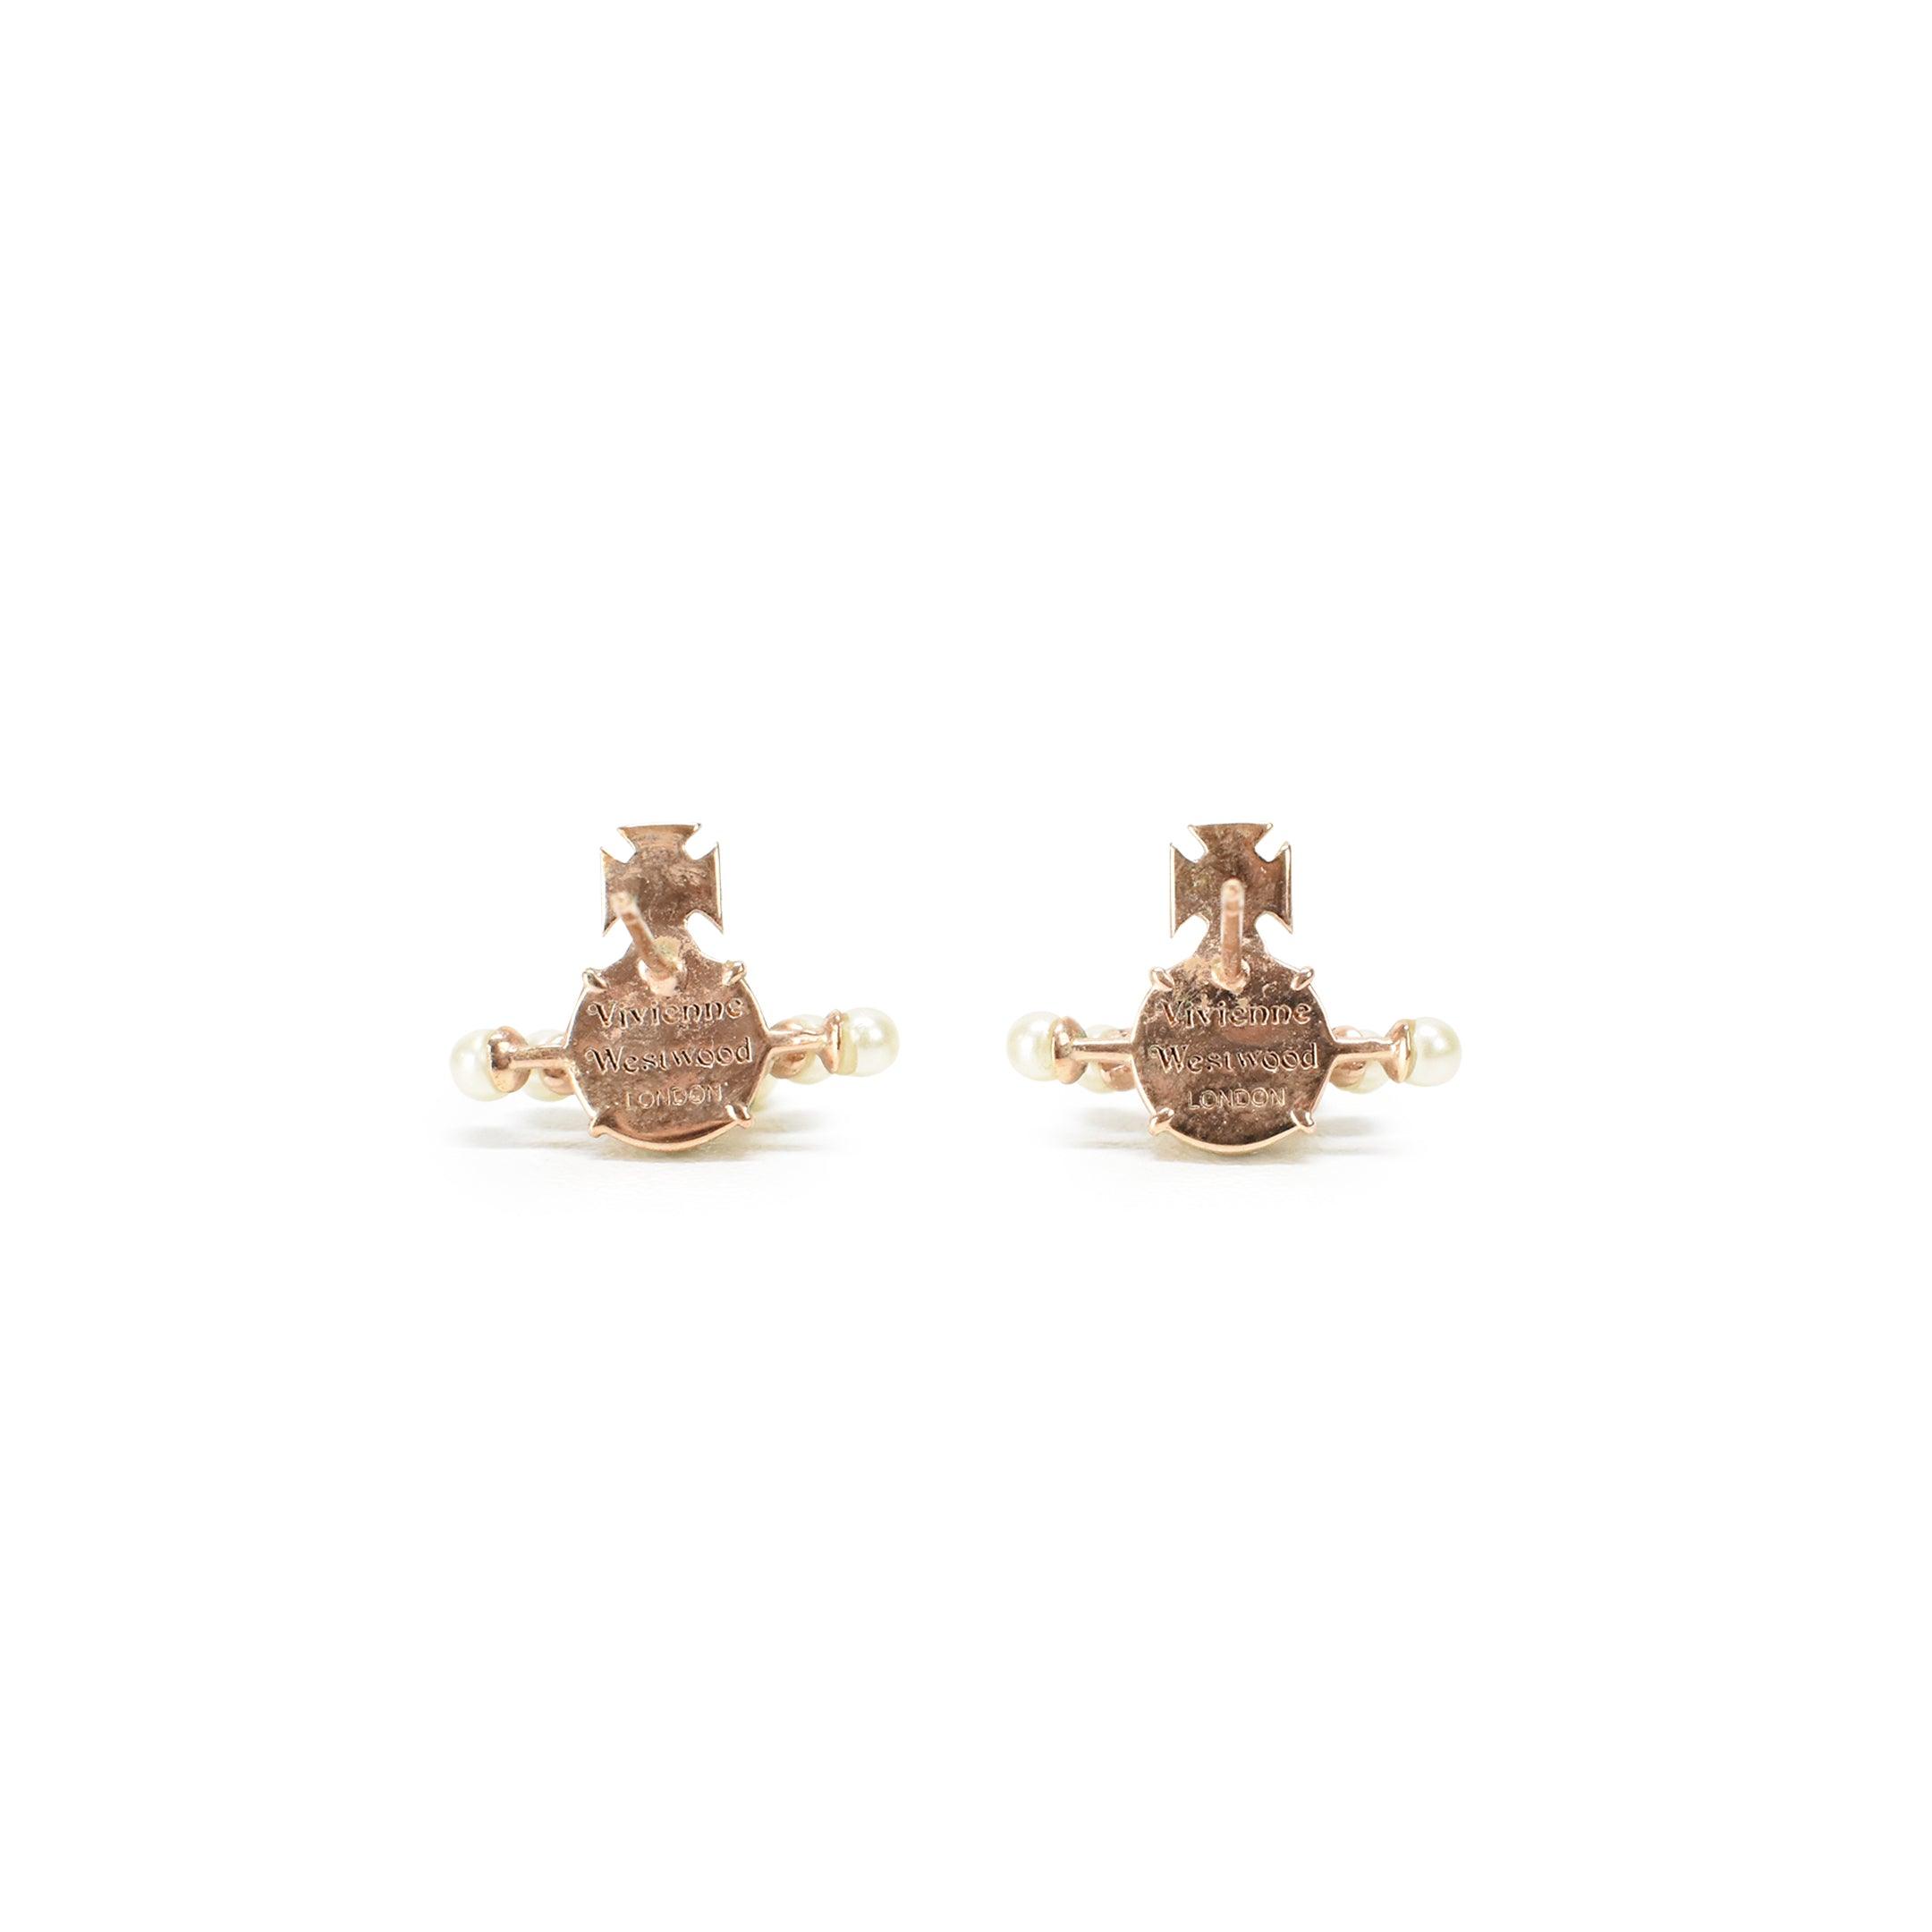 Vivienne Westwood 'Orb' Earrings - Fashionably Yours